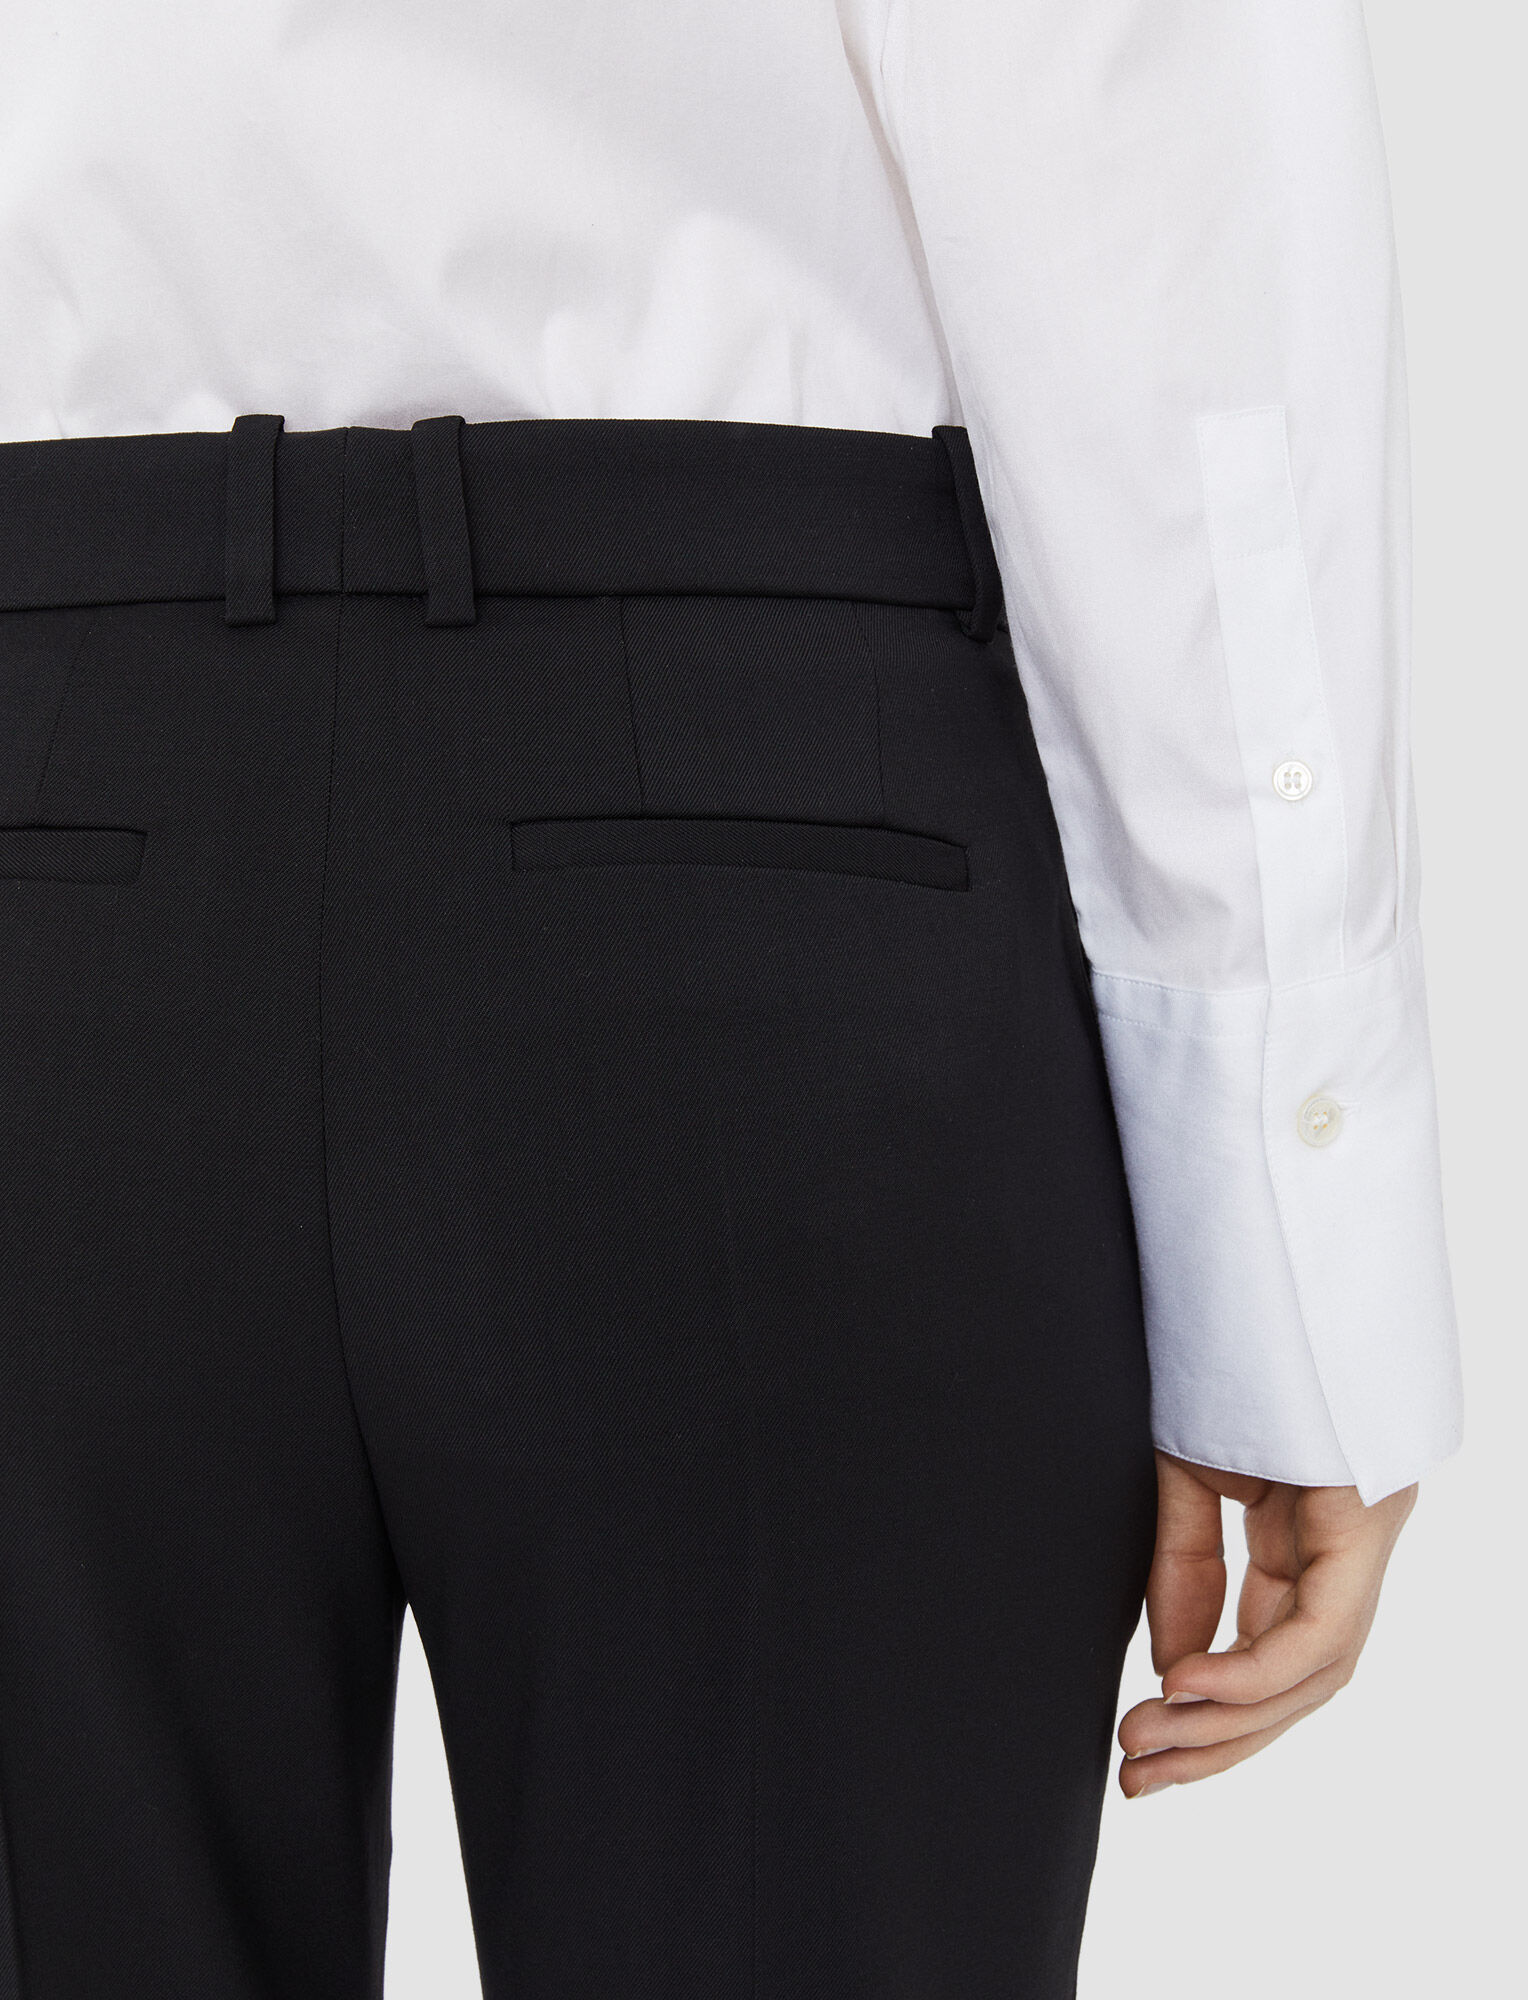 Joseph, Tailoring Wool Stretch Coleman Trousers, in Black